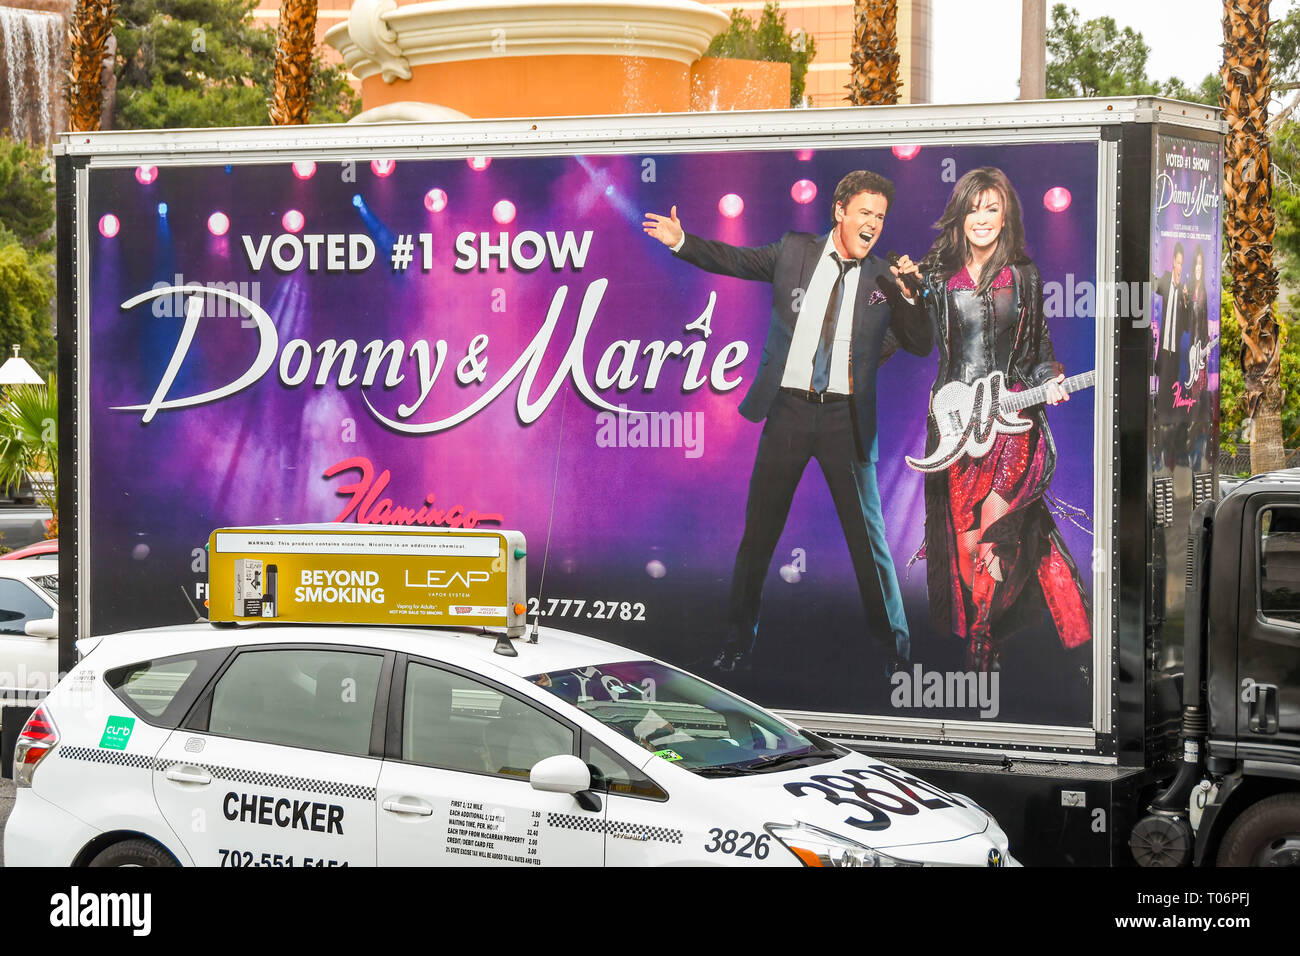 LAS VEGAS, NV, USA - FEBRUARY 2019: Large advertisement for the Donny & Marie Osmond show on the back of a truck driving down the Las Vegas Strip. Stock Photo